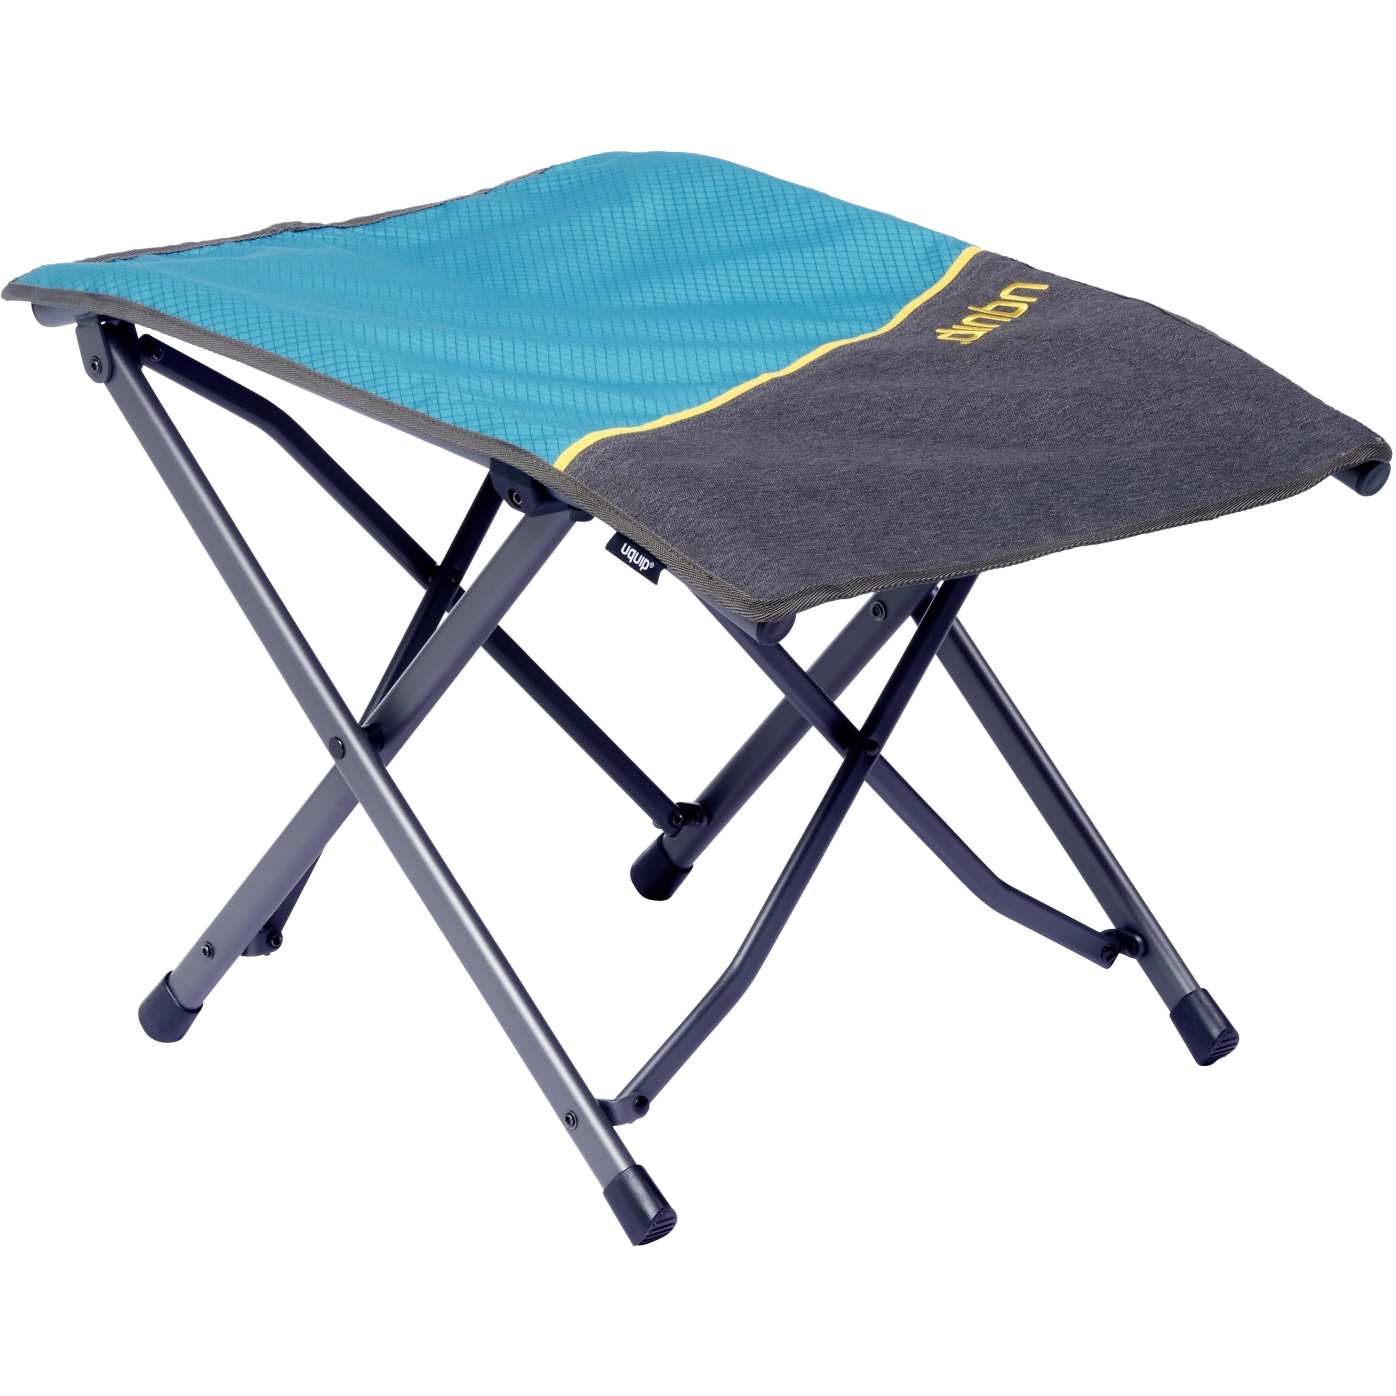 Picture of Uquip Finley Leg Rest - petrol/grey